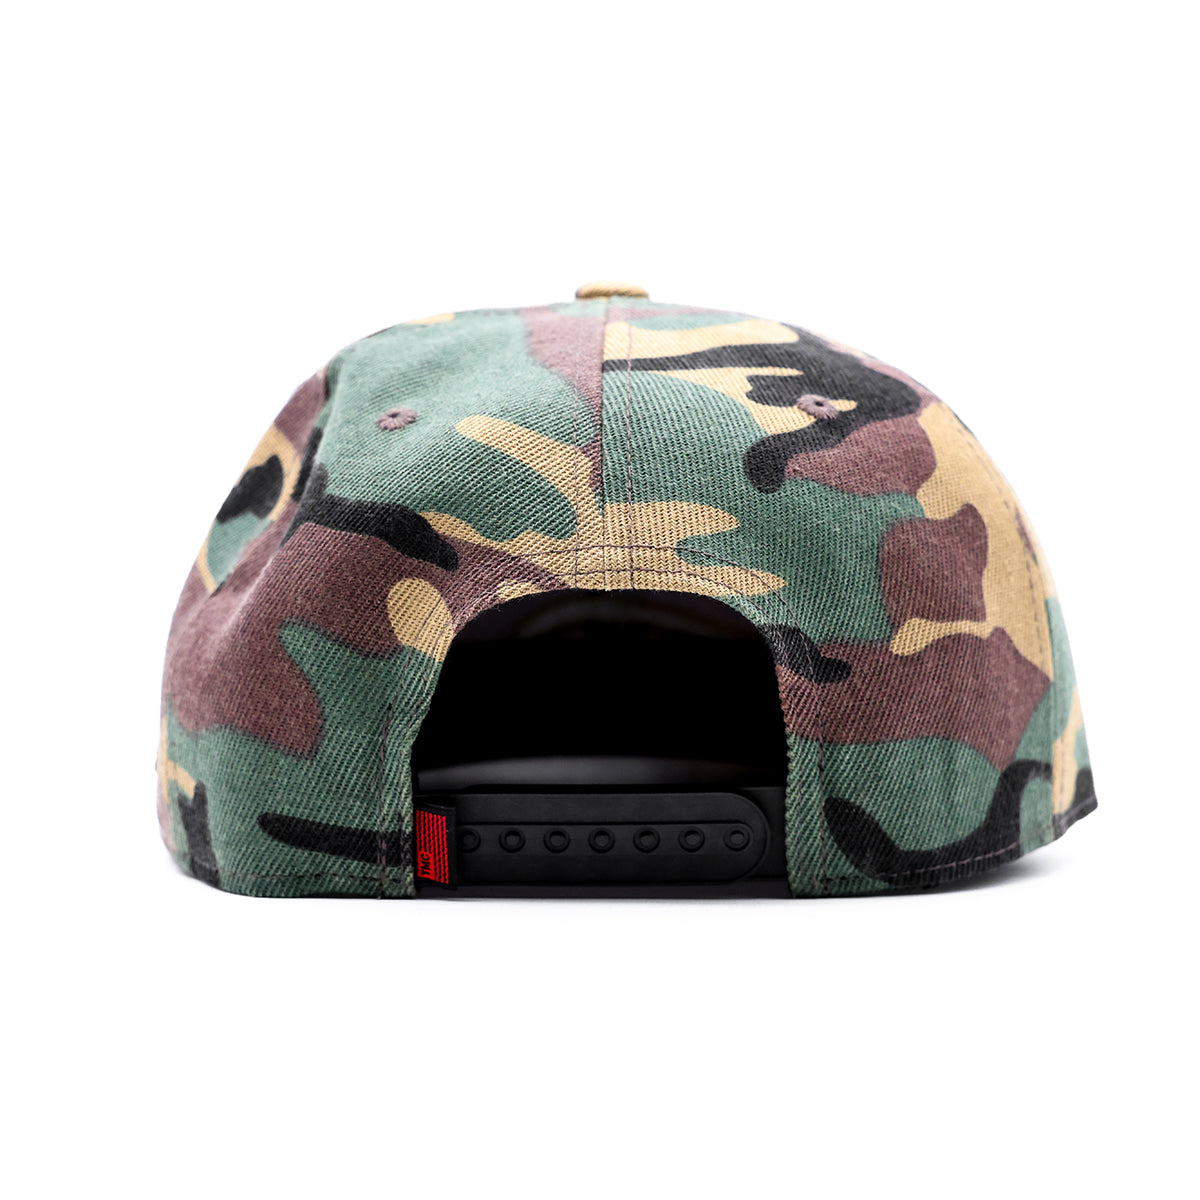 Crenshaw Limited Edition Snapback - Camo/Red - Back